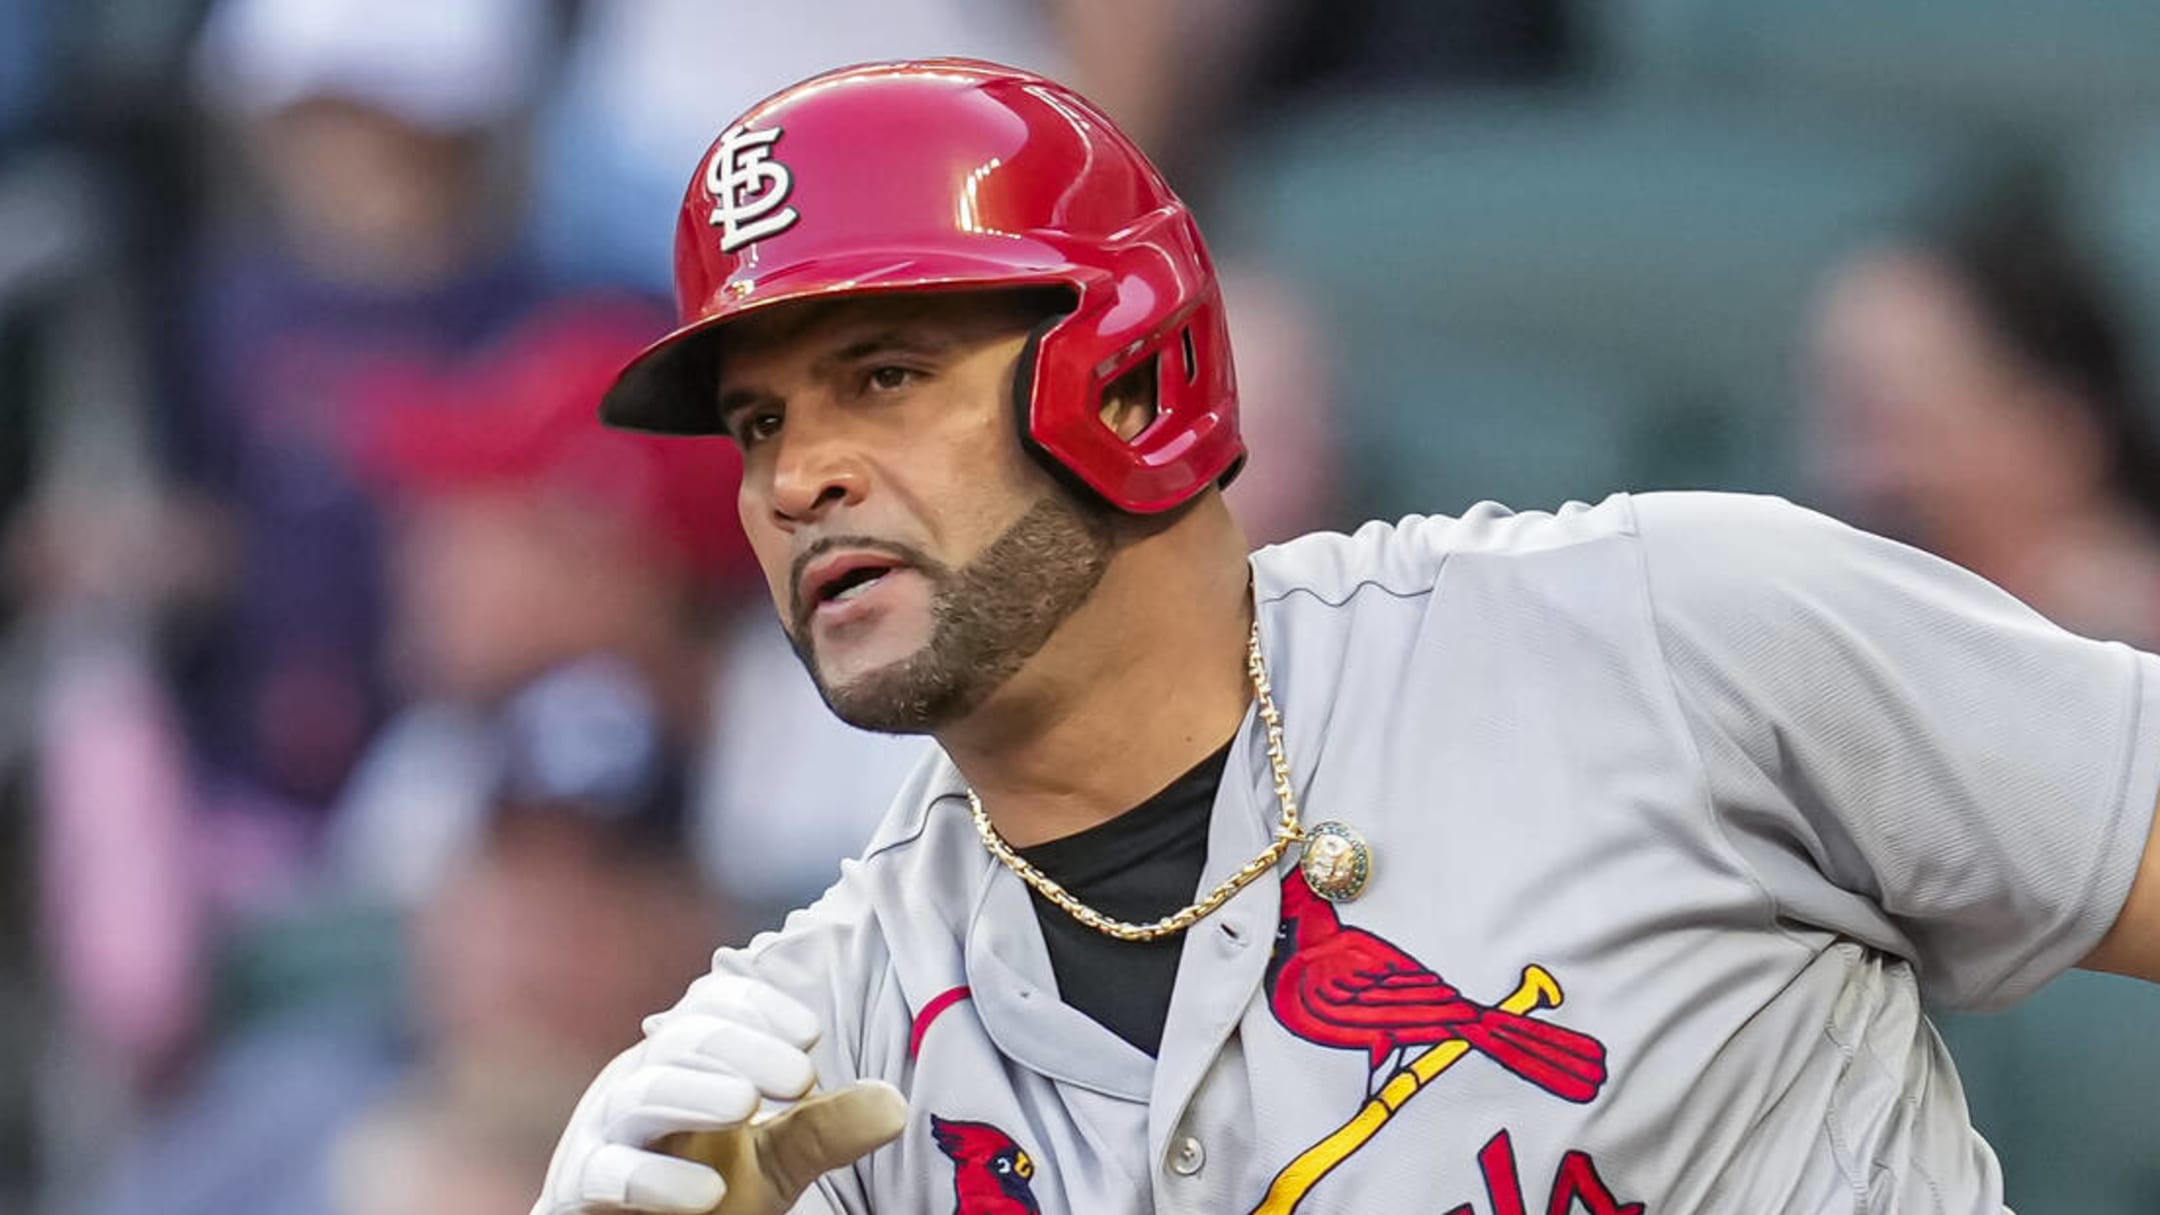 MLB on X: The Machine makes 4. Albert Pujols is officially a Dodger.   / X